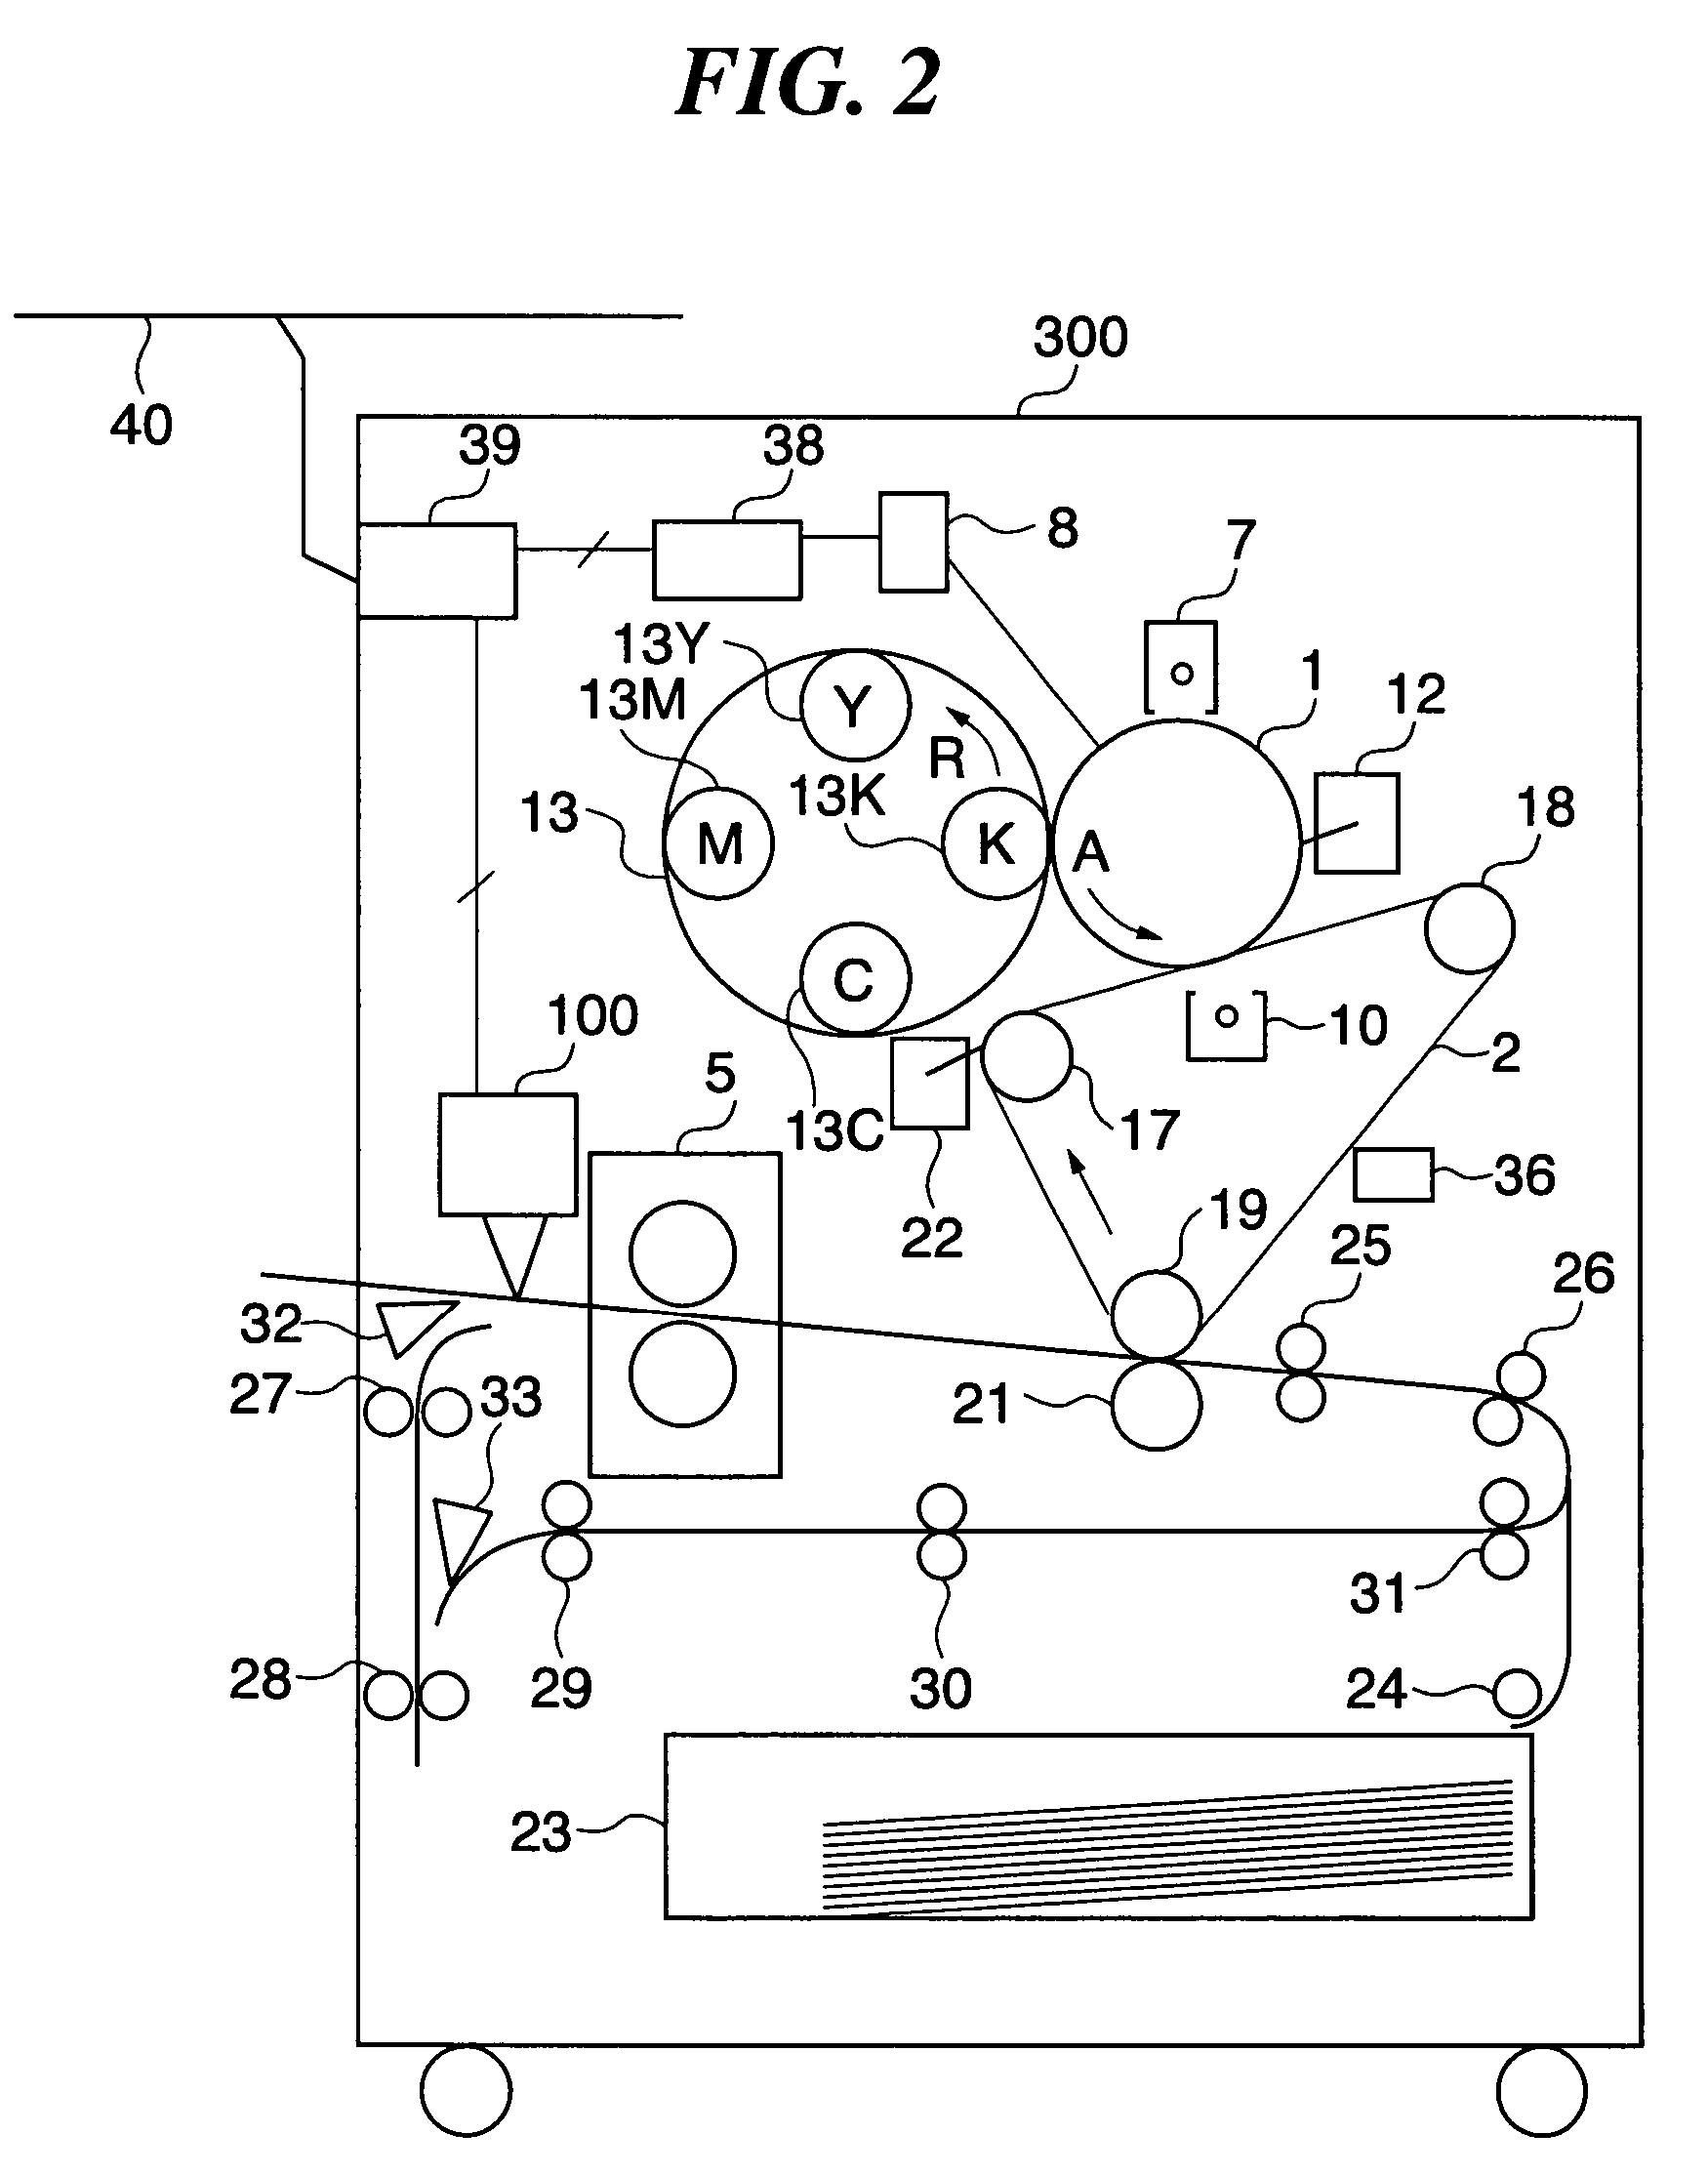 Image forming system, image distribution apparatus, and image forming method